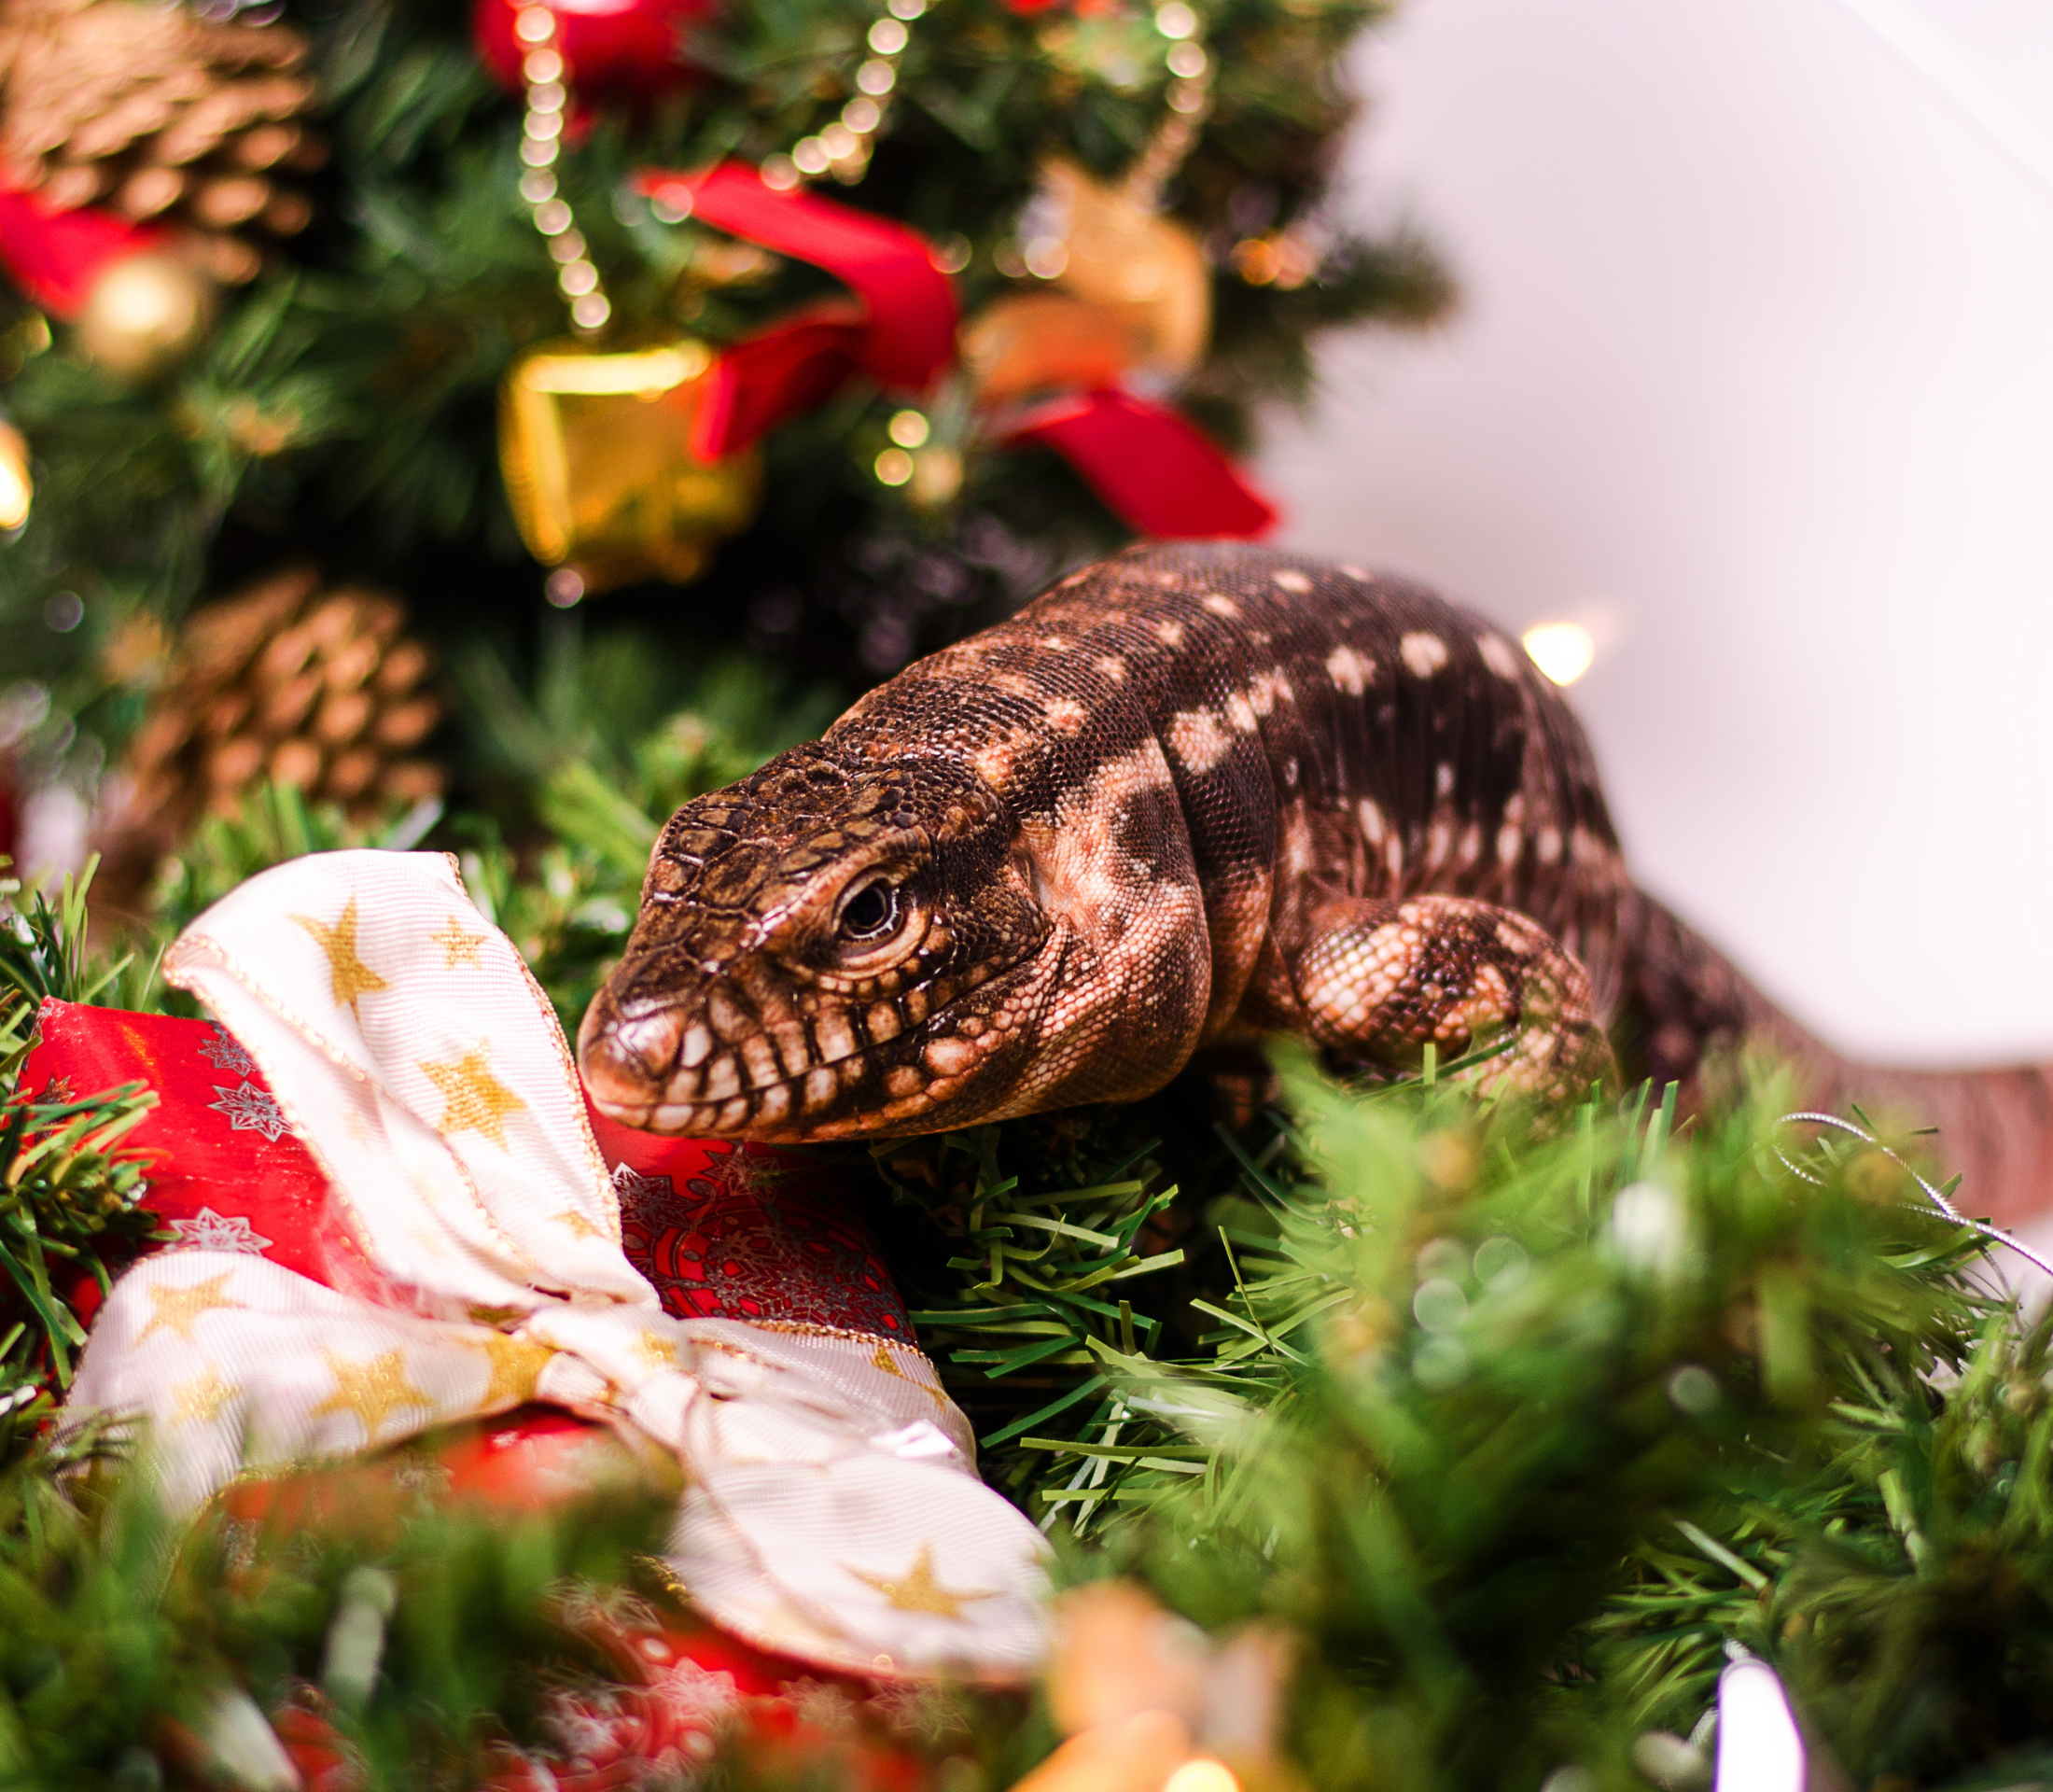 Reptile on a christmas tree